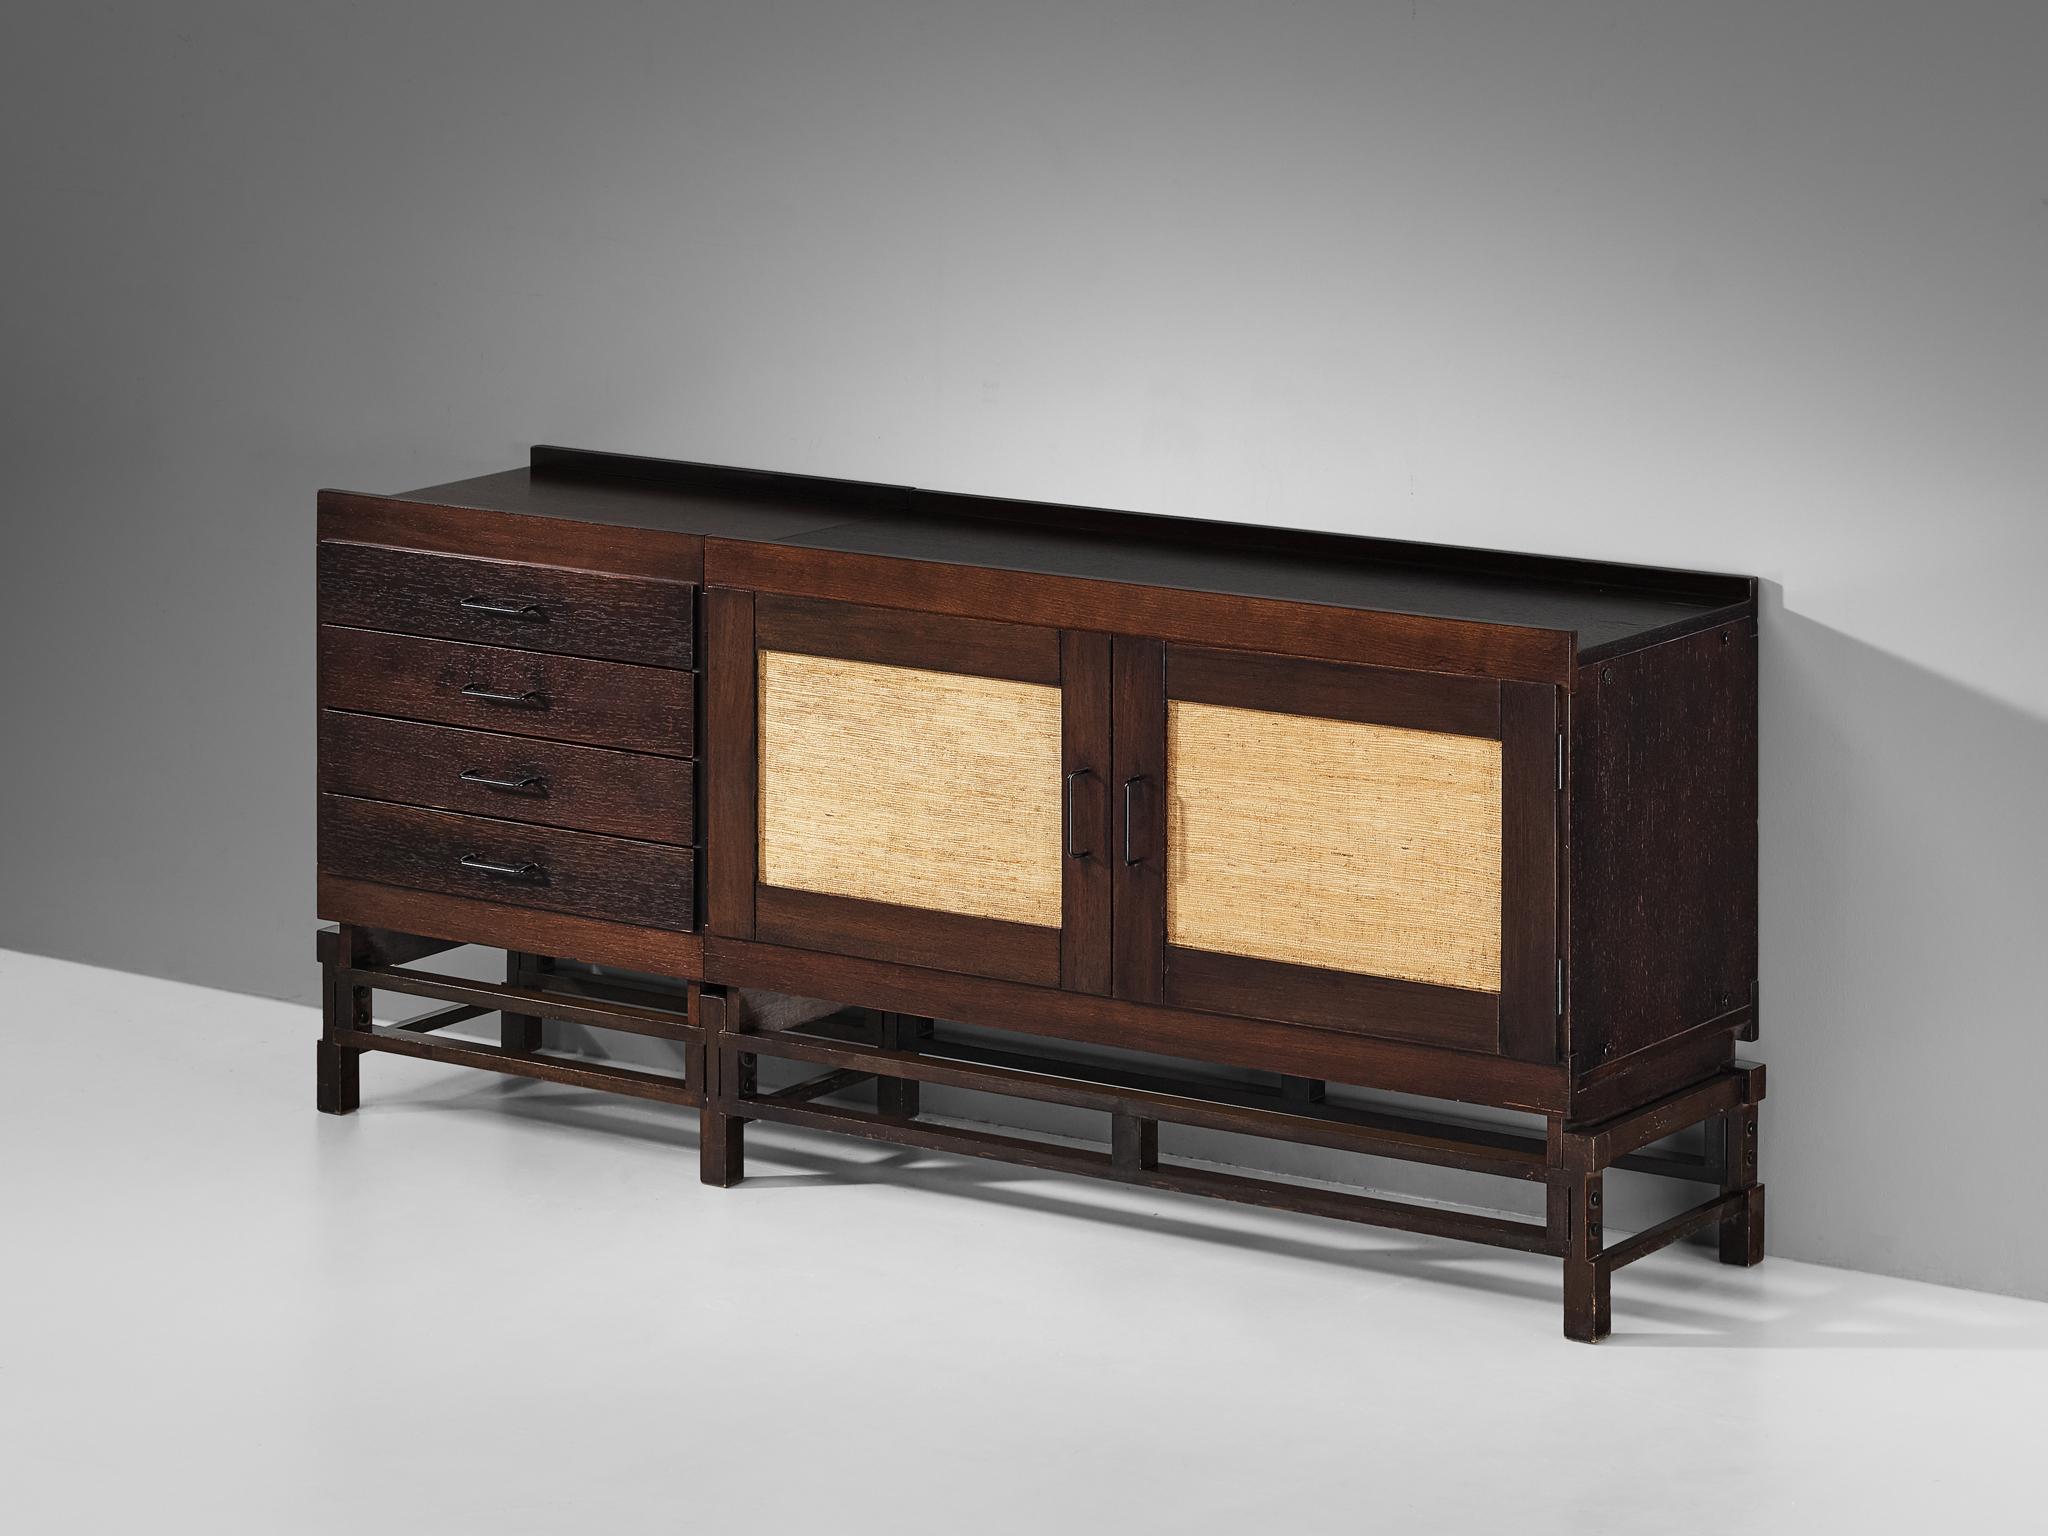 Leonardo Fiori for ISA Bergamo, sideboard, stained oak, seagrass, metal, Italy, 1950s

Beautiful sideboard designed by Leonardo Fiori for ISA Bergamo. The combination of the intense dark stained oak and the refined woven seagrass results in an